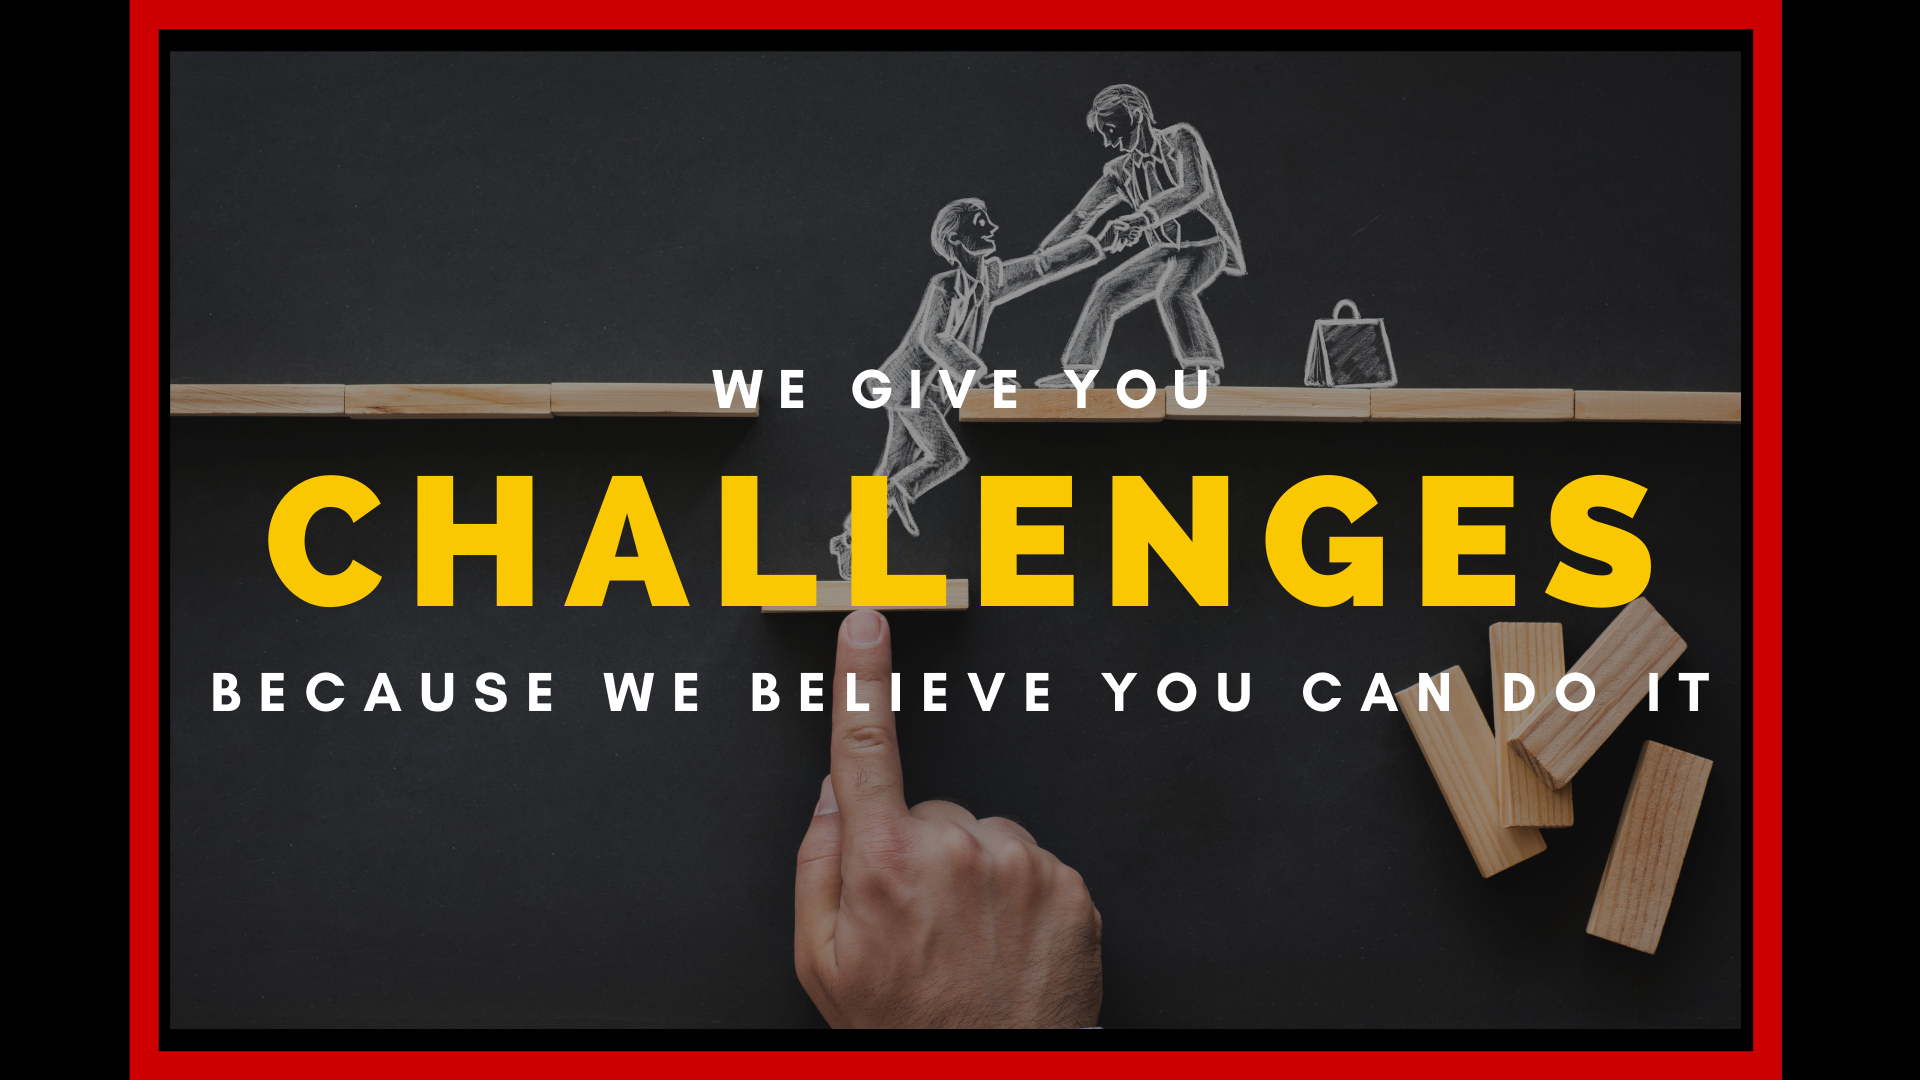 Challenges: We give you challenges because we believe you can.